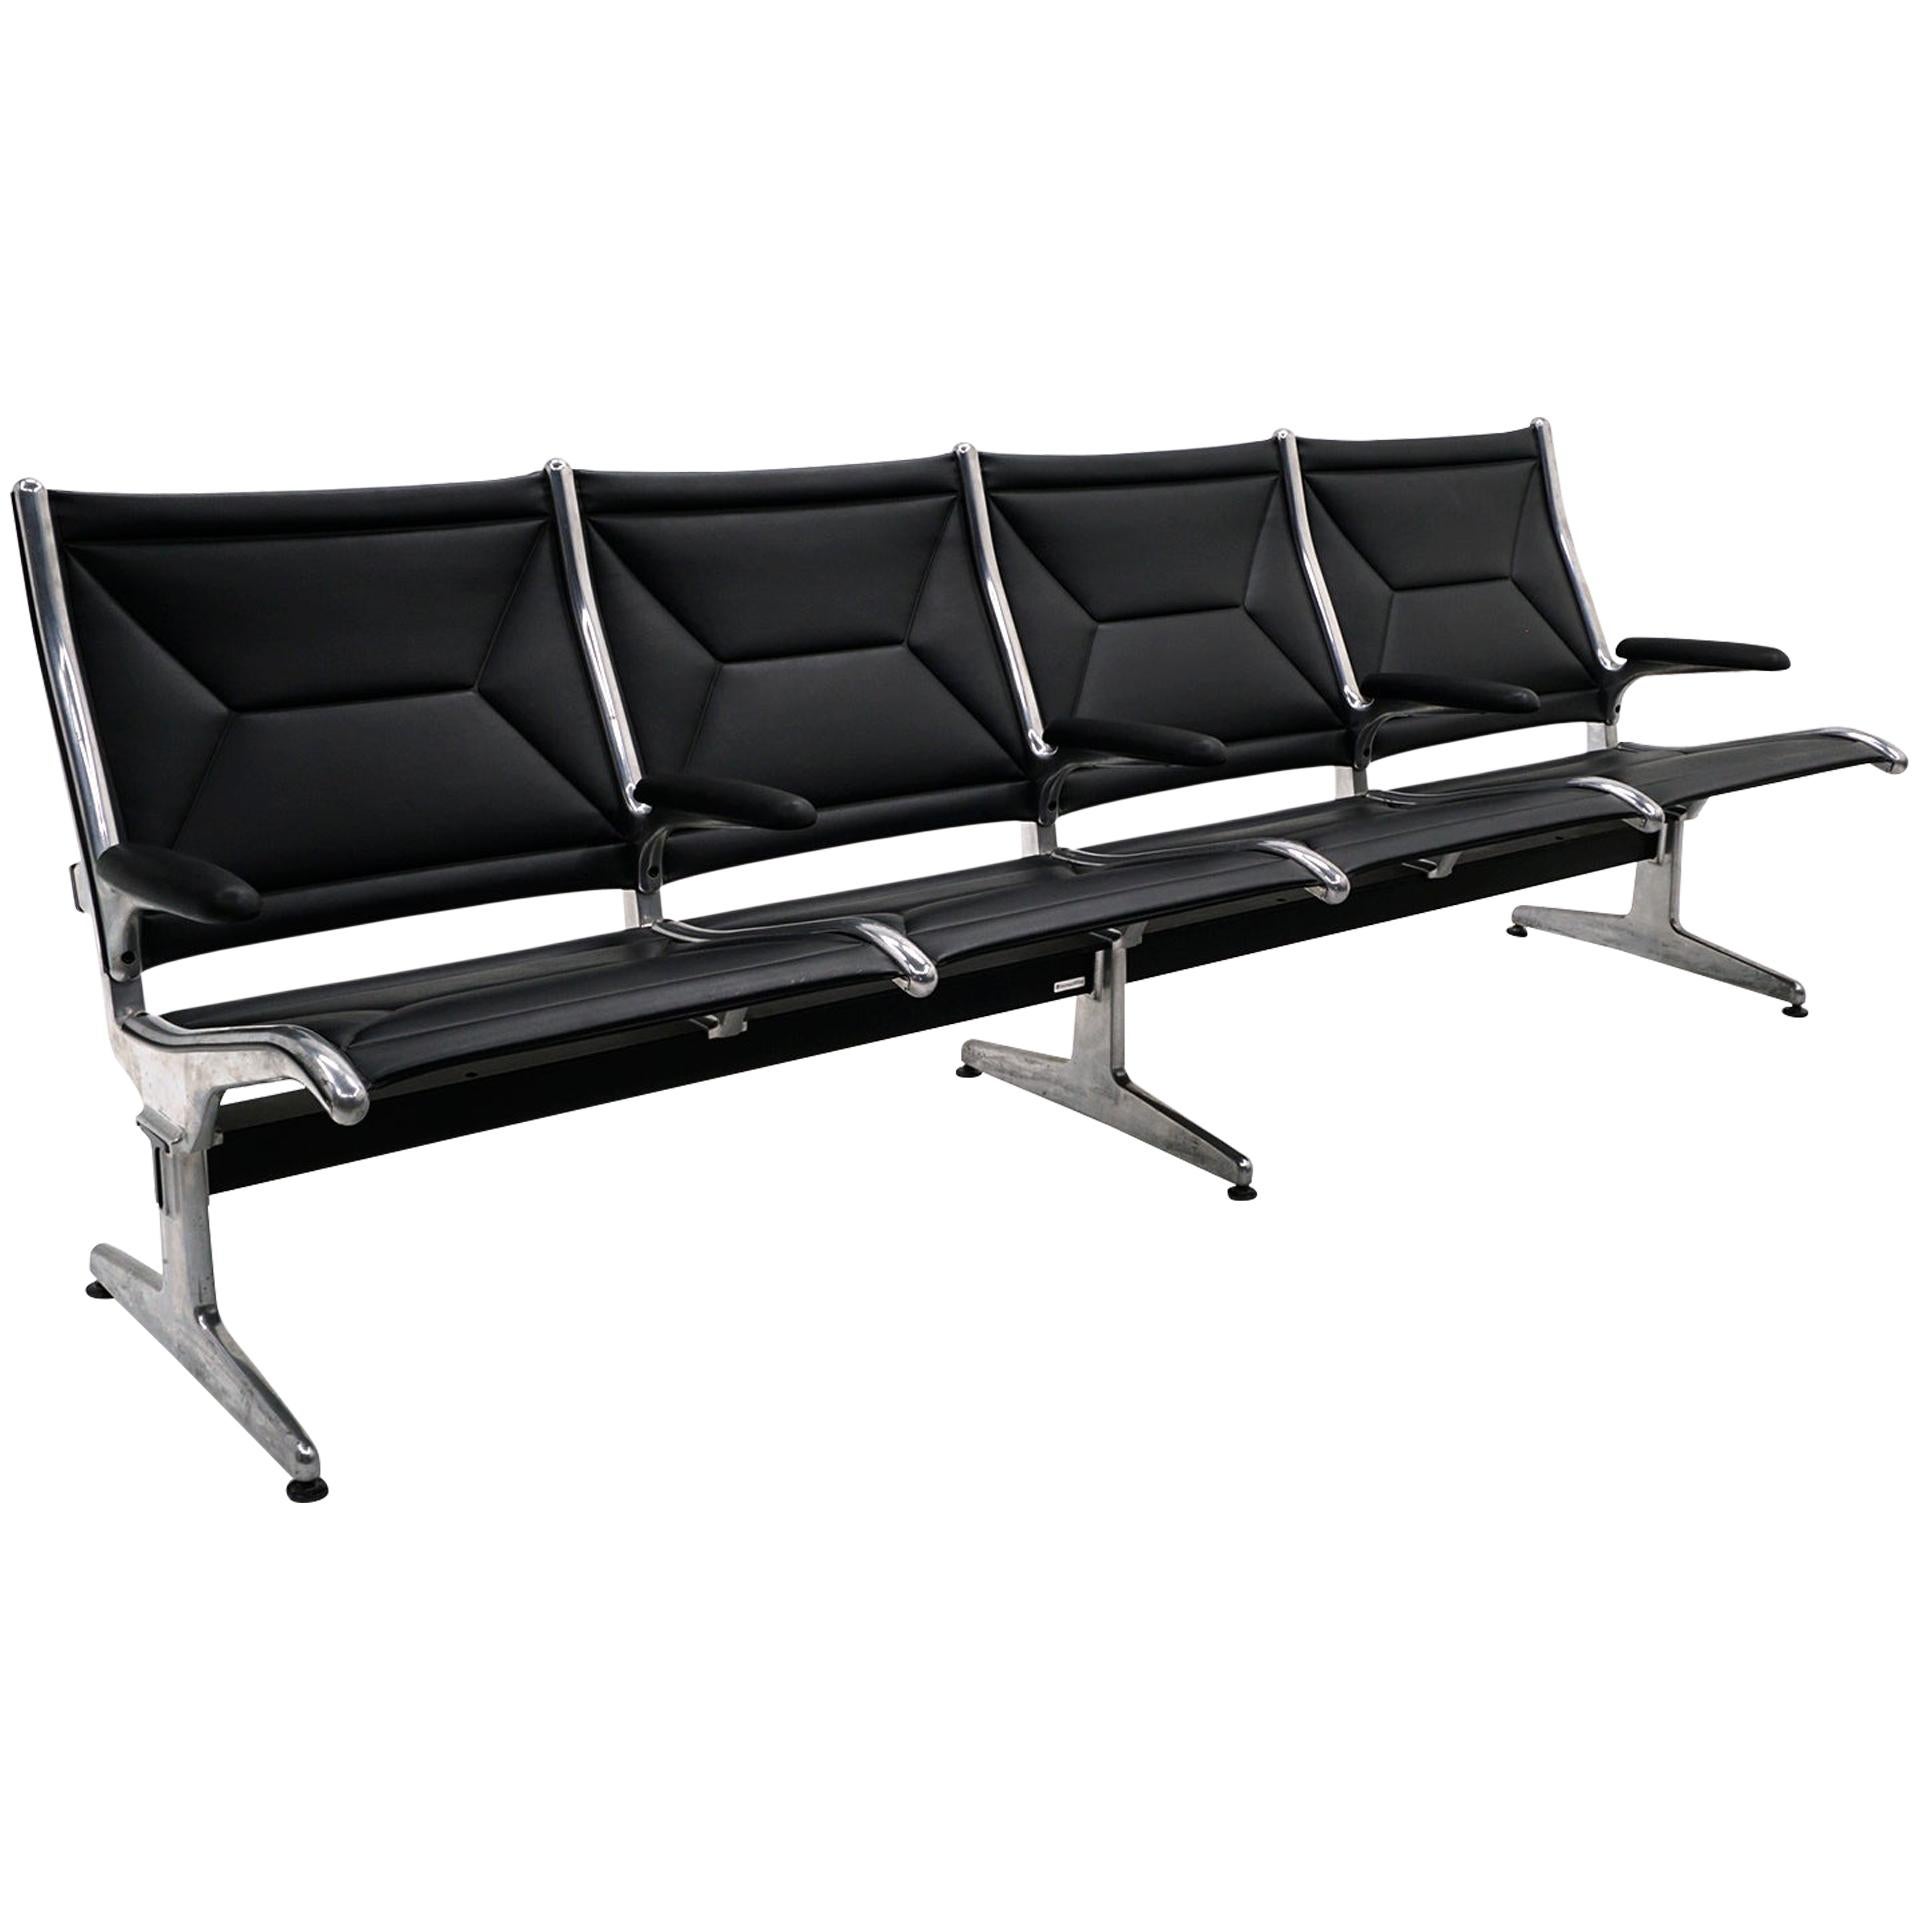 Tandem Airport Seating for Four by Charles & Ray Eames, Black Leather, Aluminum